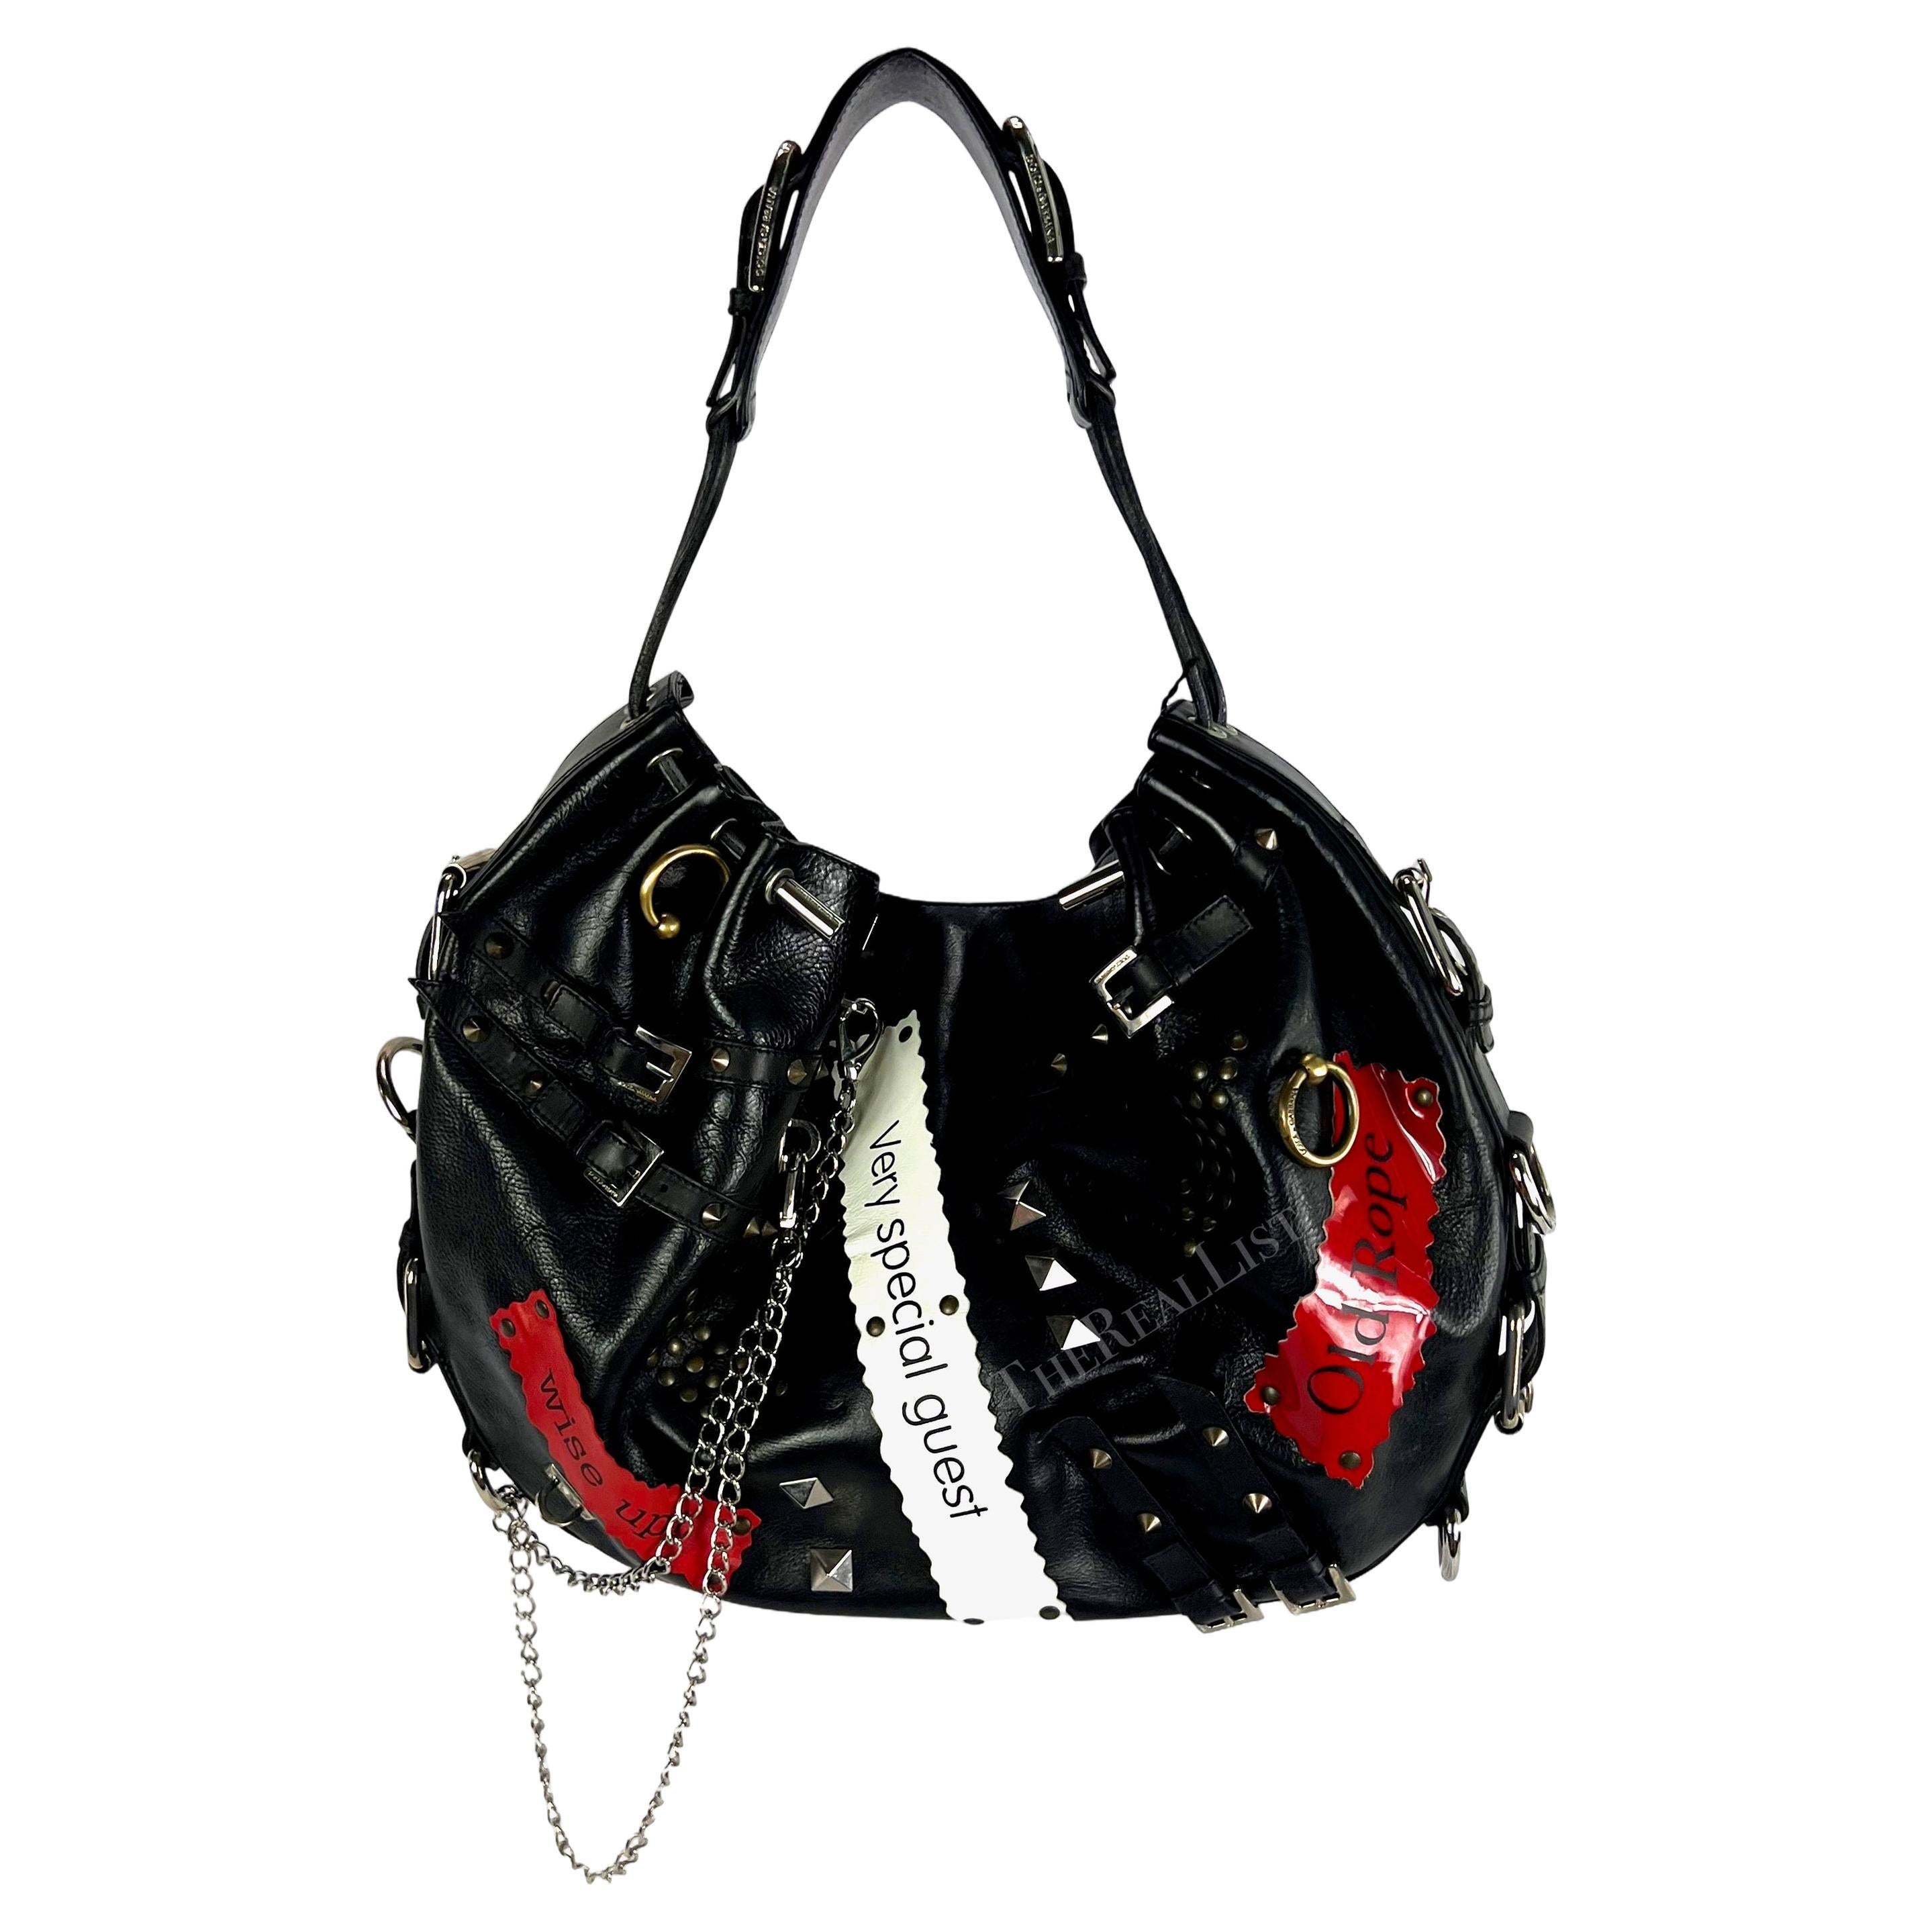 NWT S/S 2003 Dolce & Gabbana Studded Leather Punk Chain Large Tote Shoulder Bag For Sale